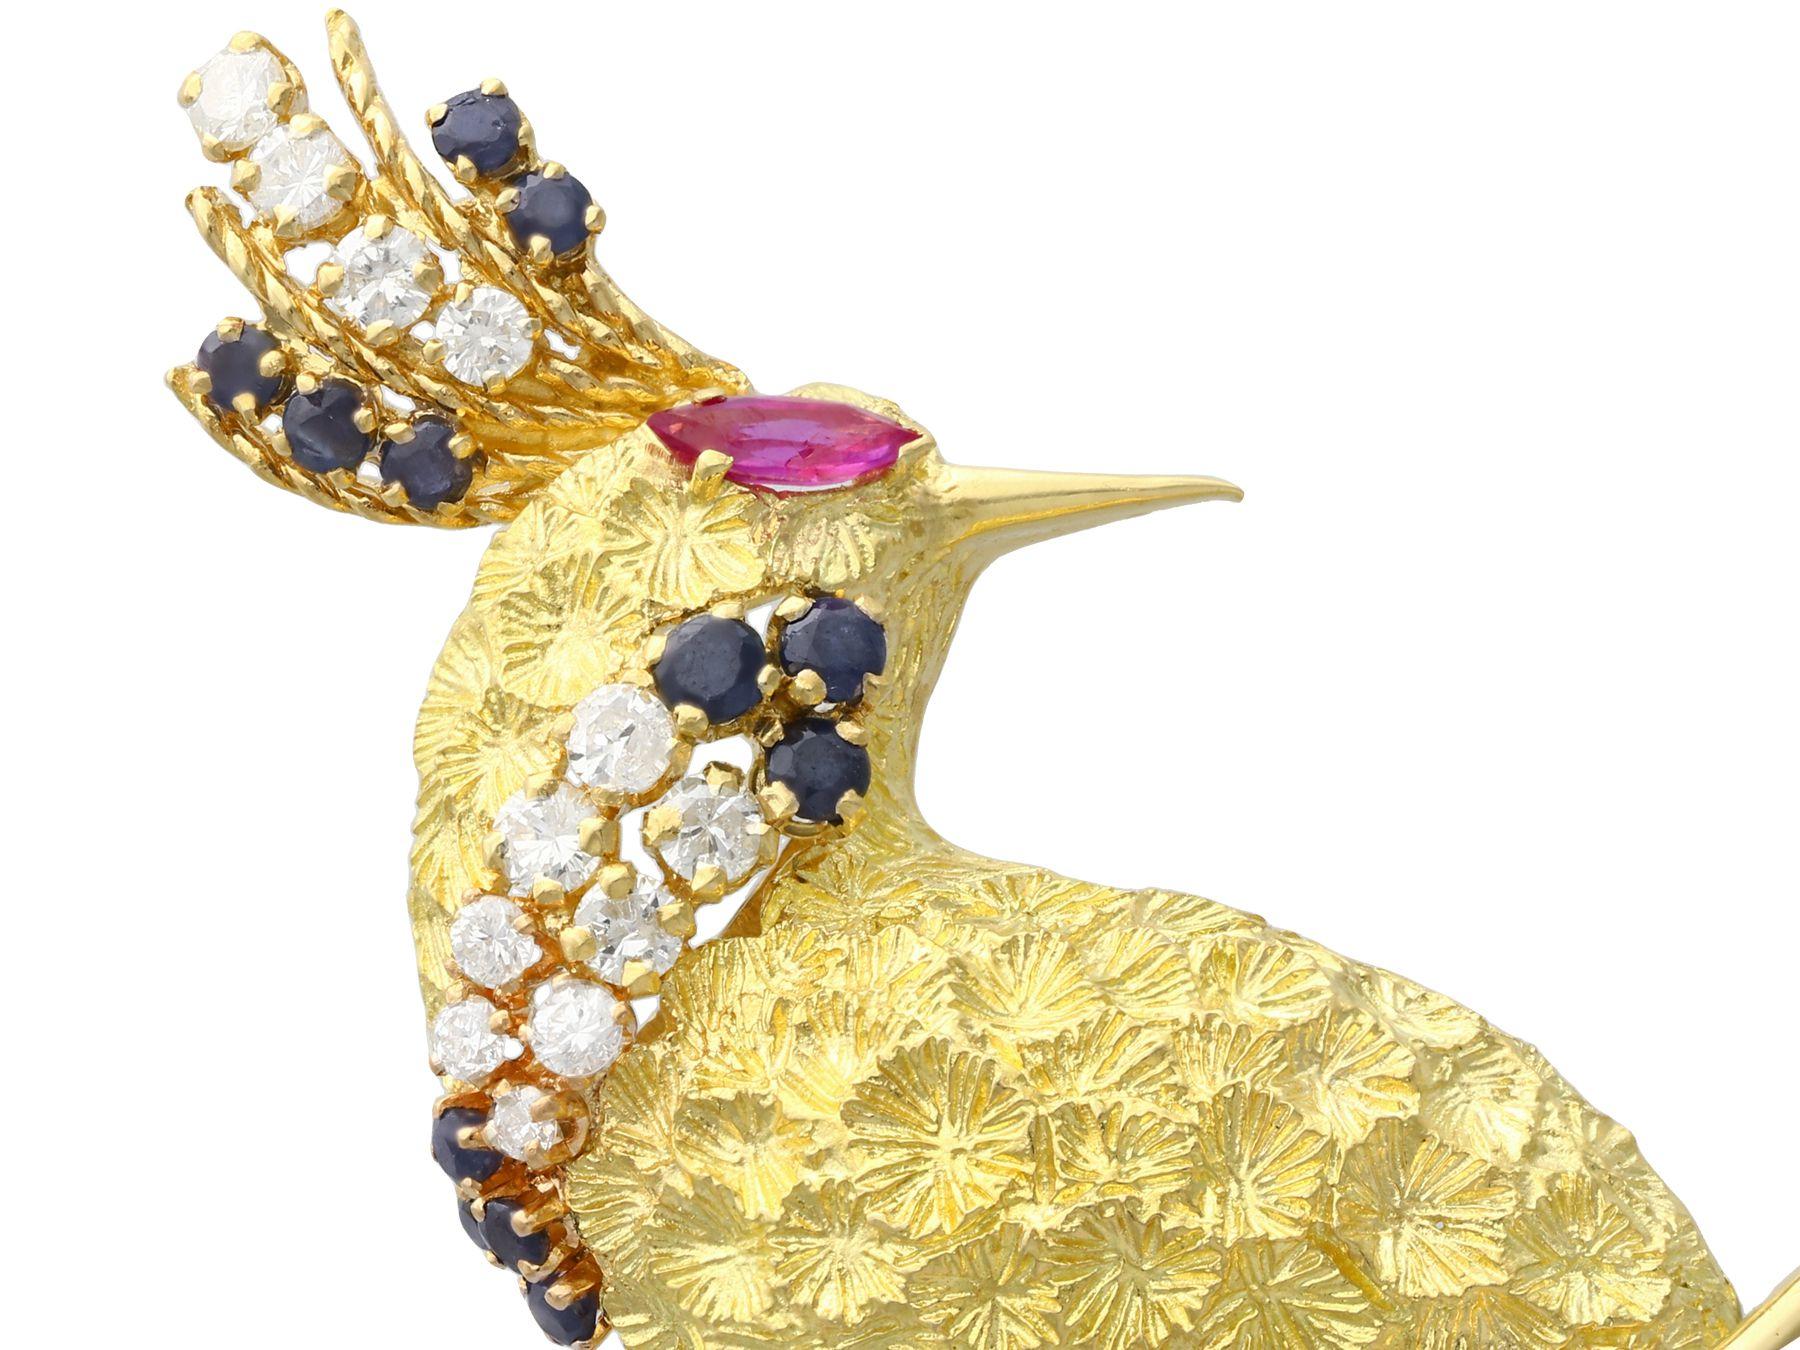 A stunning, large and impressive 0.42 carat diamond, 0.28 carat ruby and 0.45 carat sapphire, 18 karat yellow gold peacock brooch; part of our diverse jewelry collections.

This stunning, fine and impressive brooch has been crafted in 18k yellow